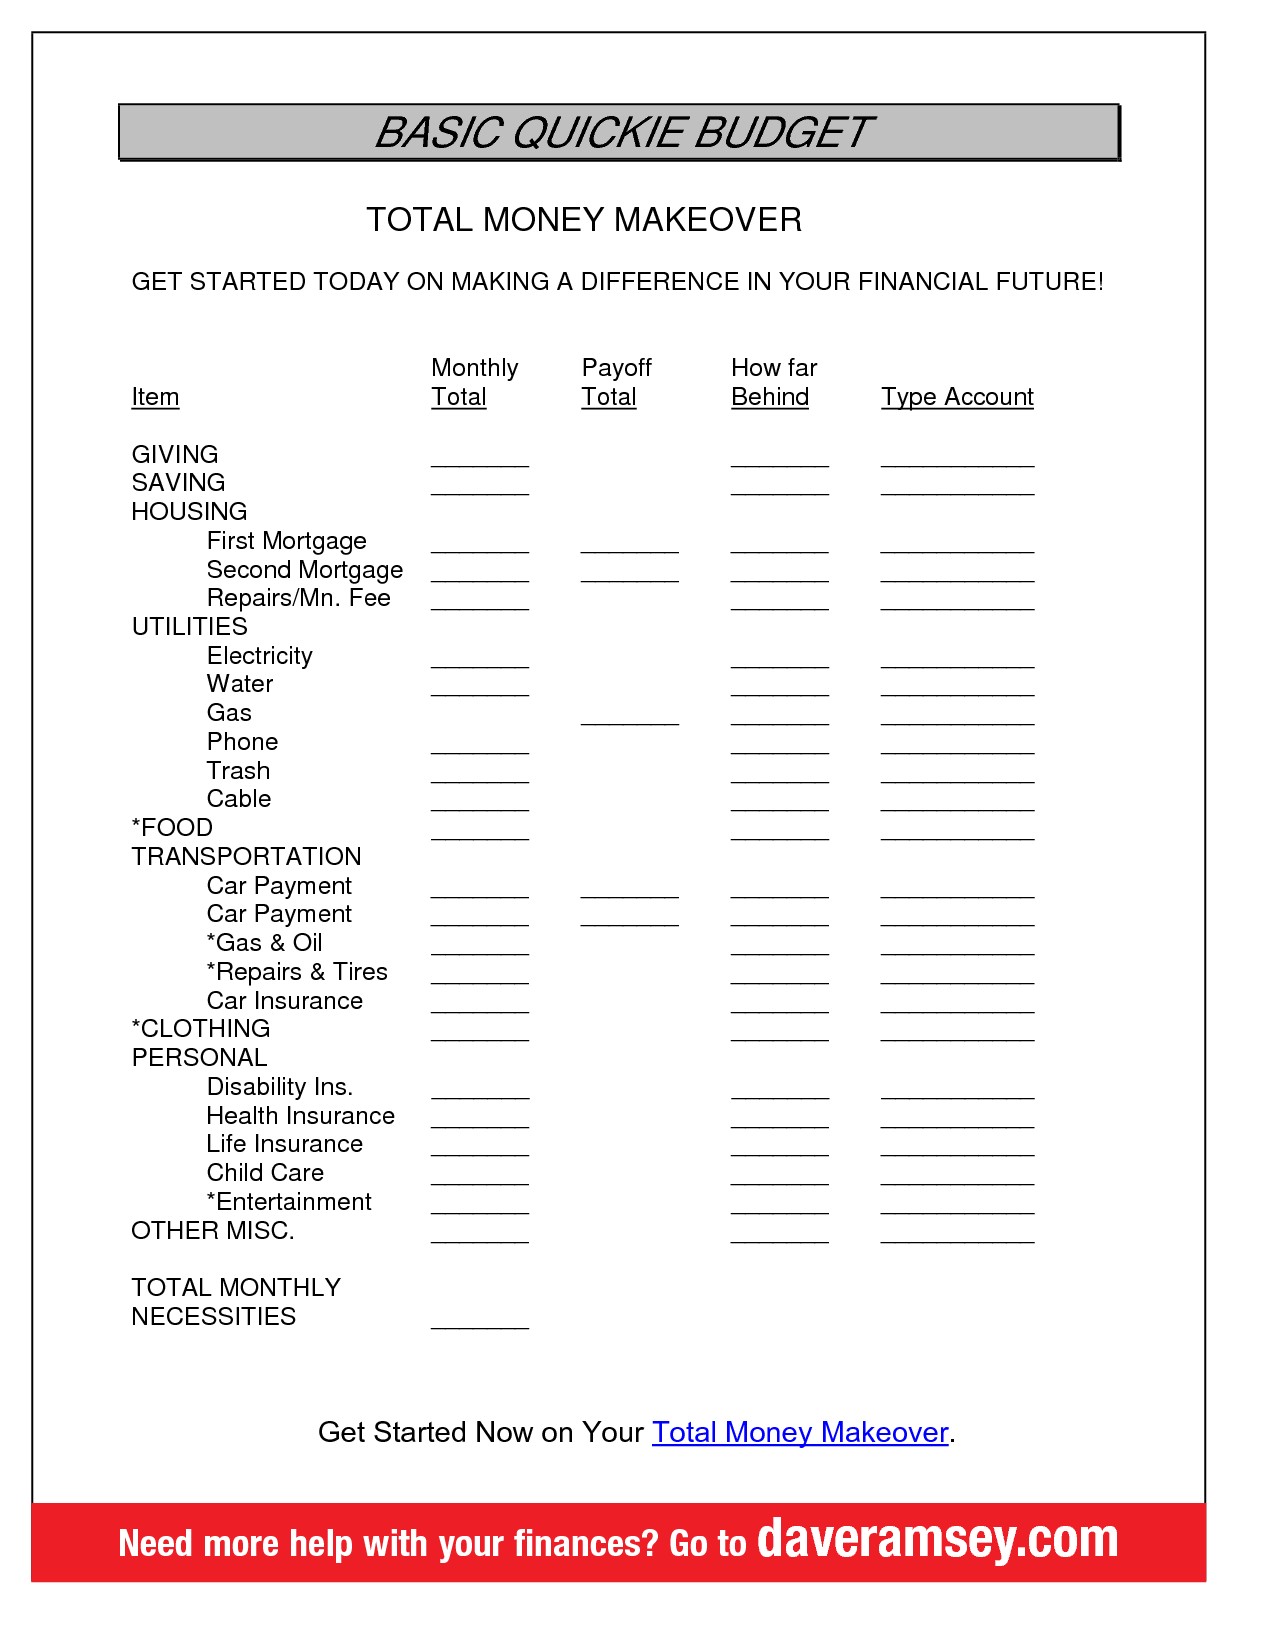 Dave Ramsey Budget Template BASIC QUICKIE BUDGET TOTAL Biblical Document Templates